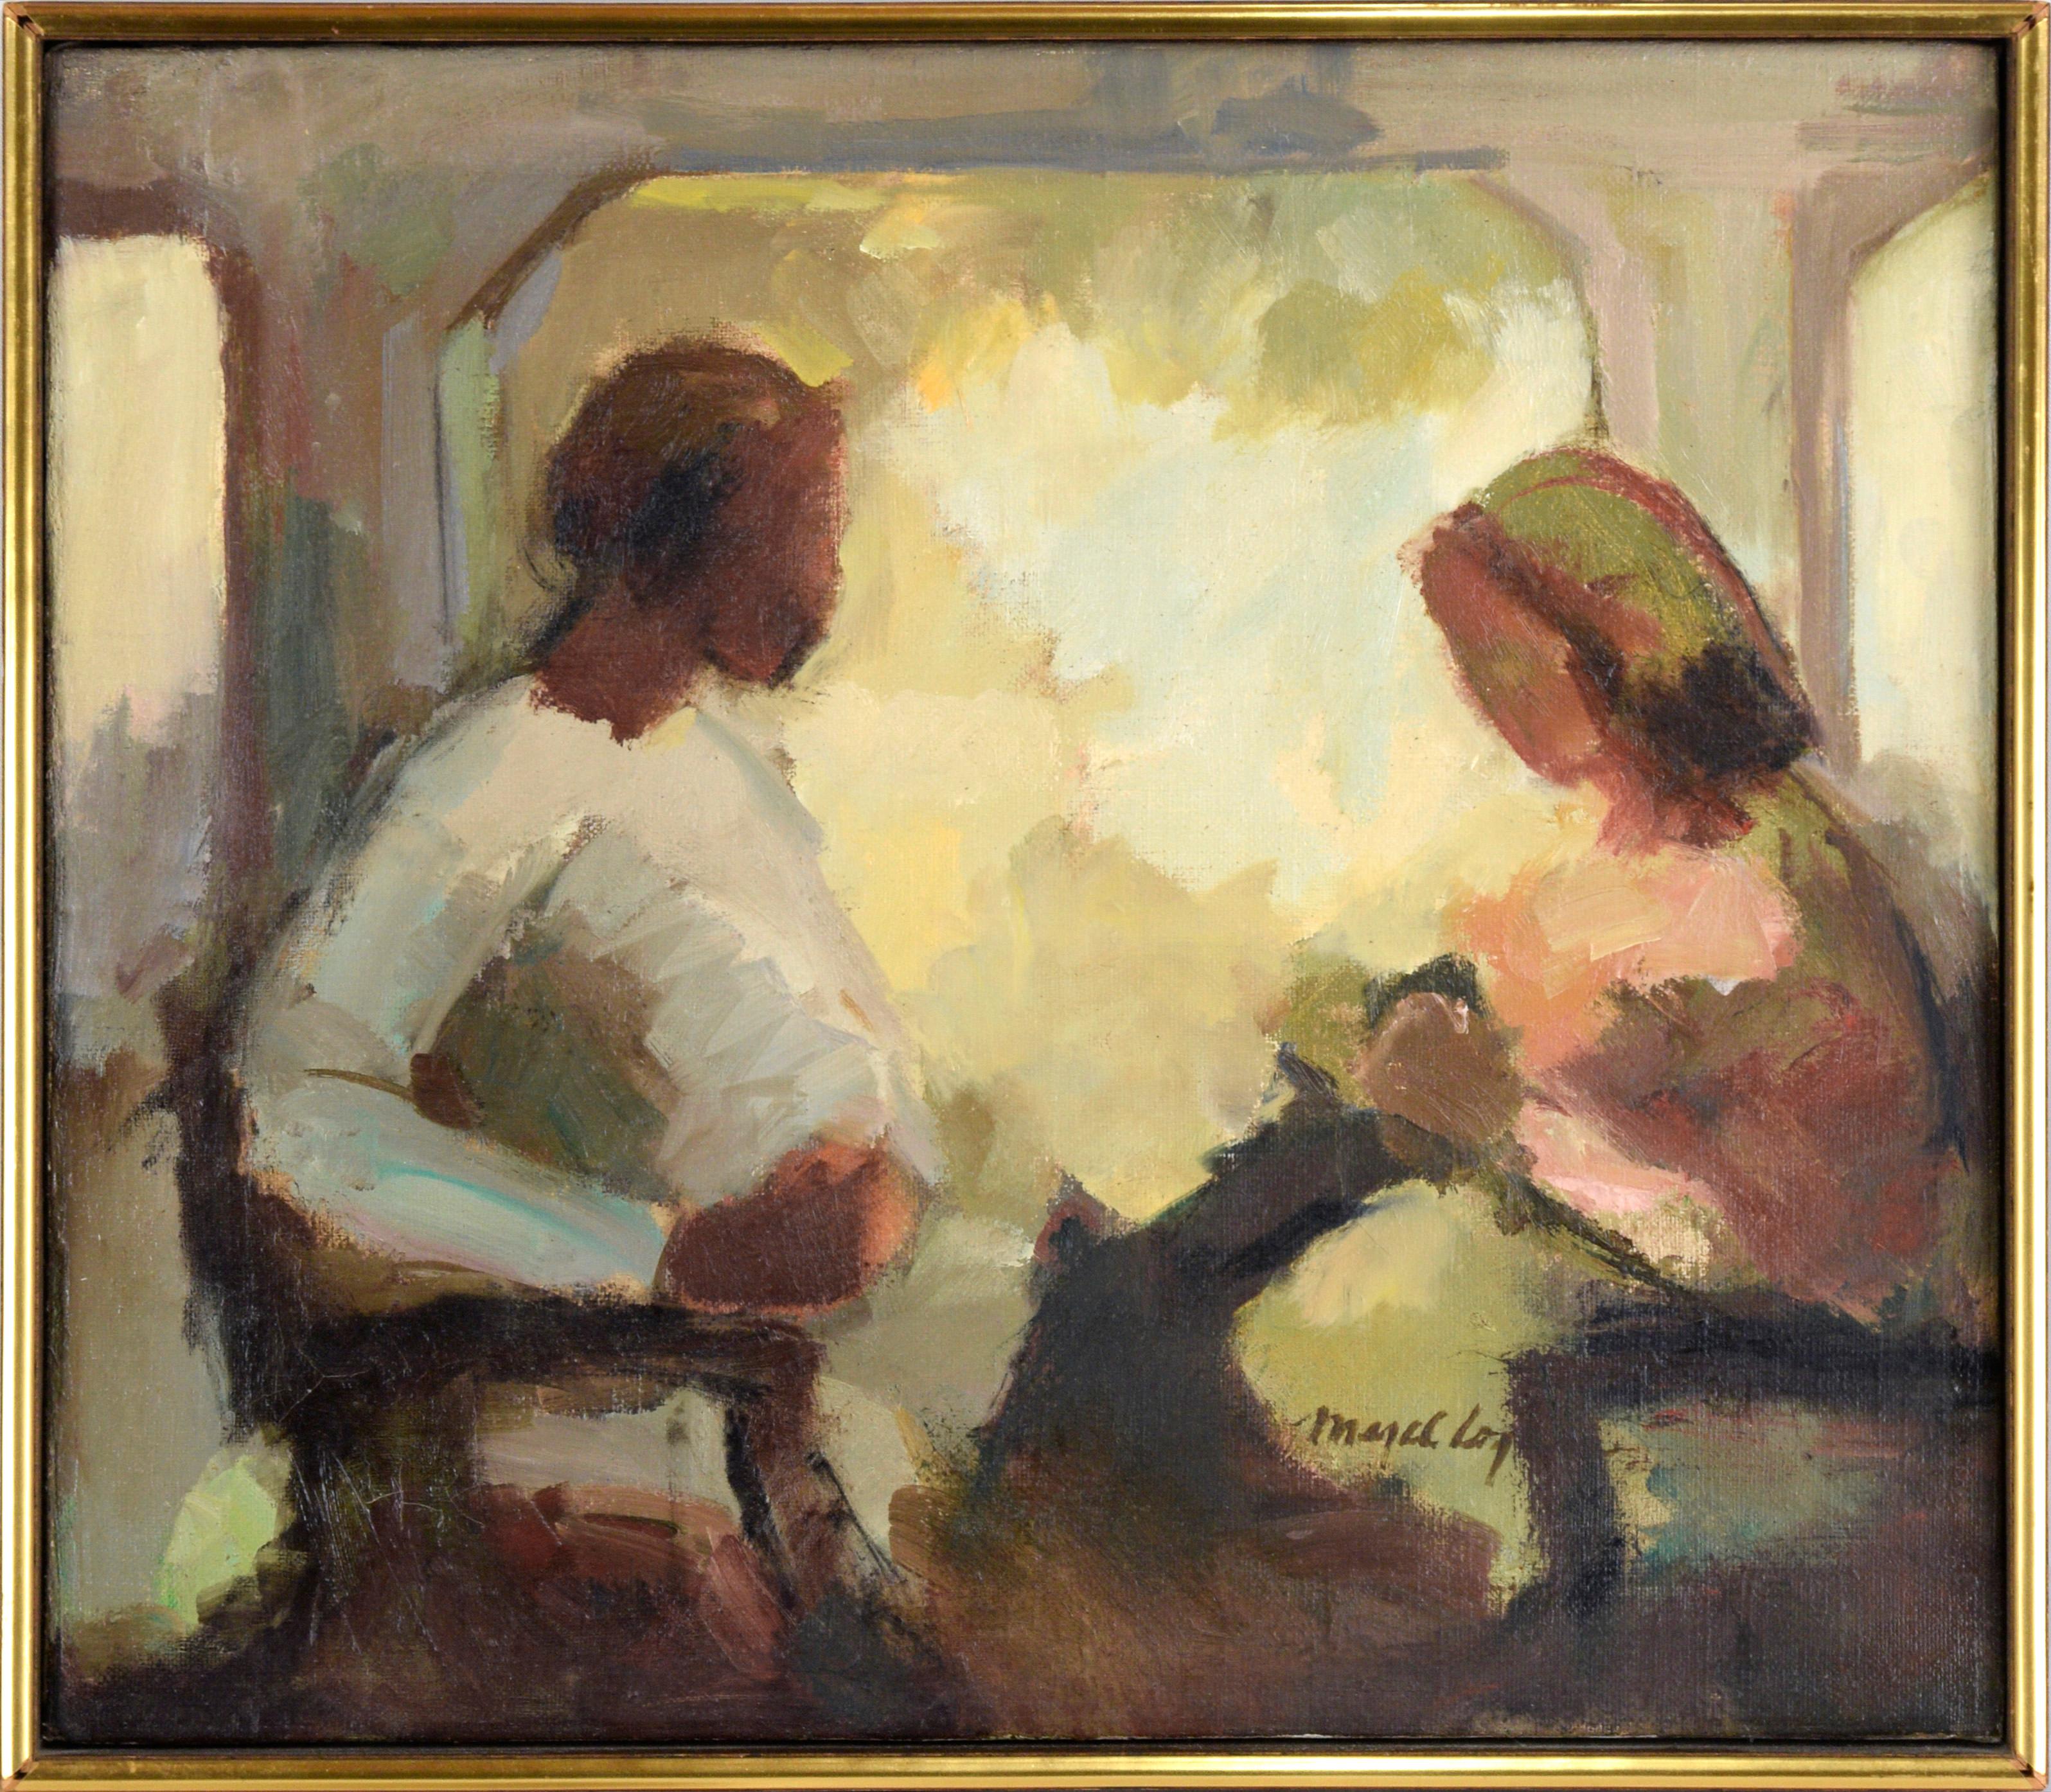 Majel Logan Landscape Painting - "Porch People" - Figurative Composition in Oil on Linen